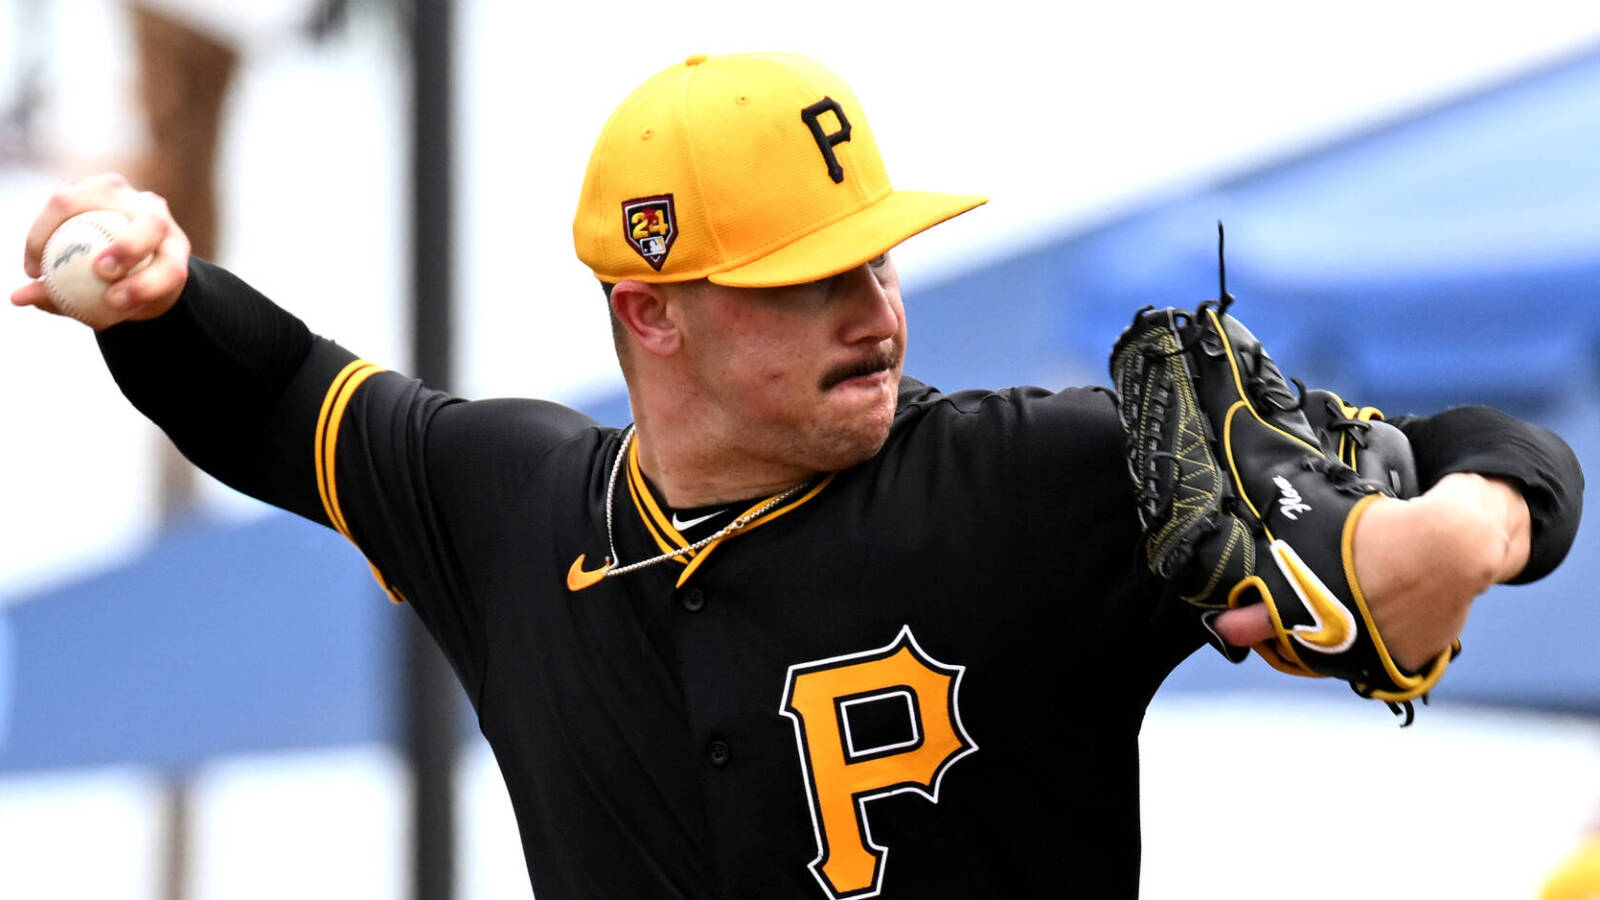 Pirates No. 1 overall pick continues to make mockery of minor league hitters